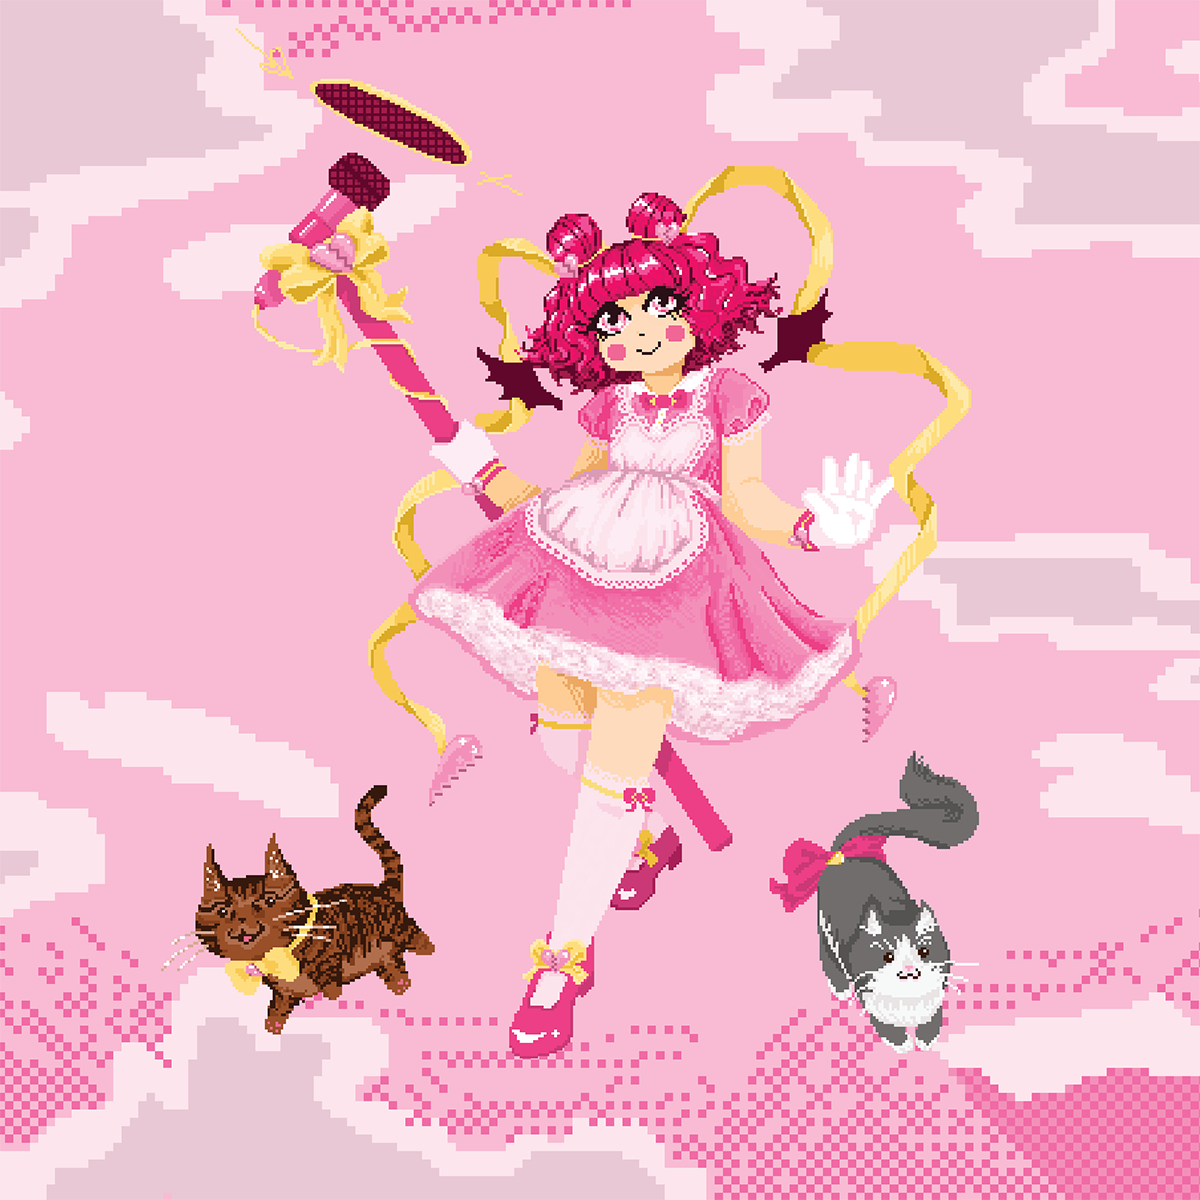 illustration of magical girl with a pink broken hearts theme. She has red curly hair, a pink doll dress, yellow ribbon accents with broken heart charms, and is holding a huge microphone. Two chibi cats are by her feet, a brown one to the left, and a grey and white one to the right. The background is a sky with clouds.